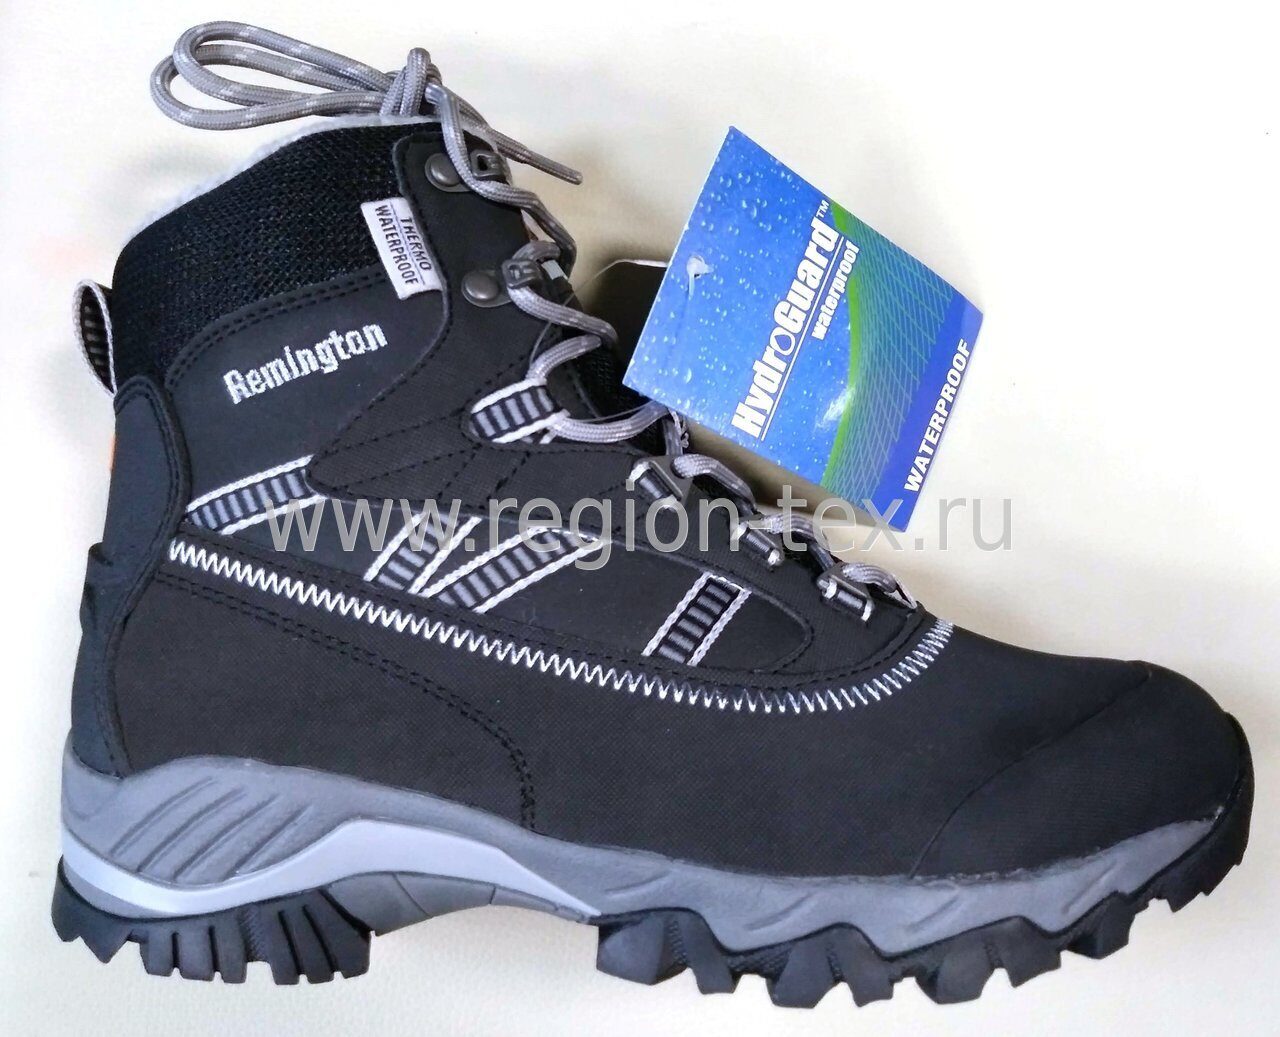 women's insulated hiking boots